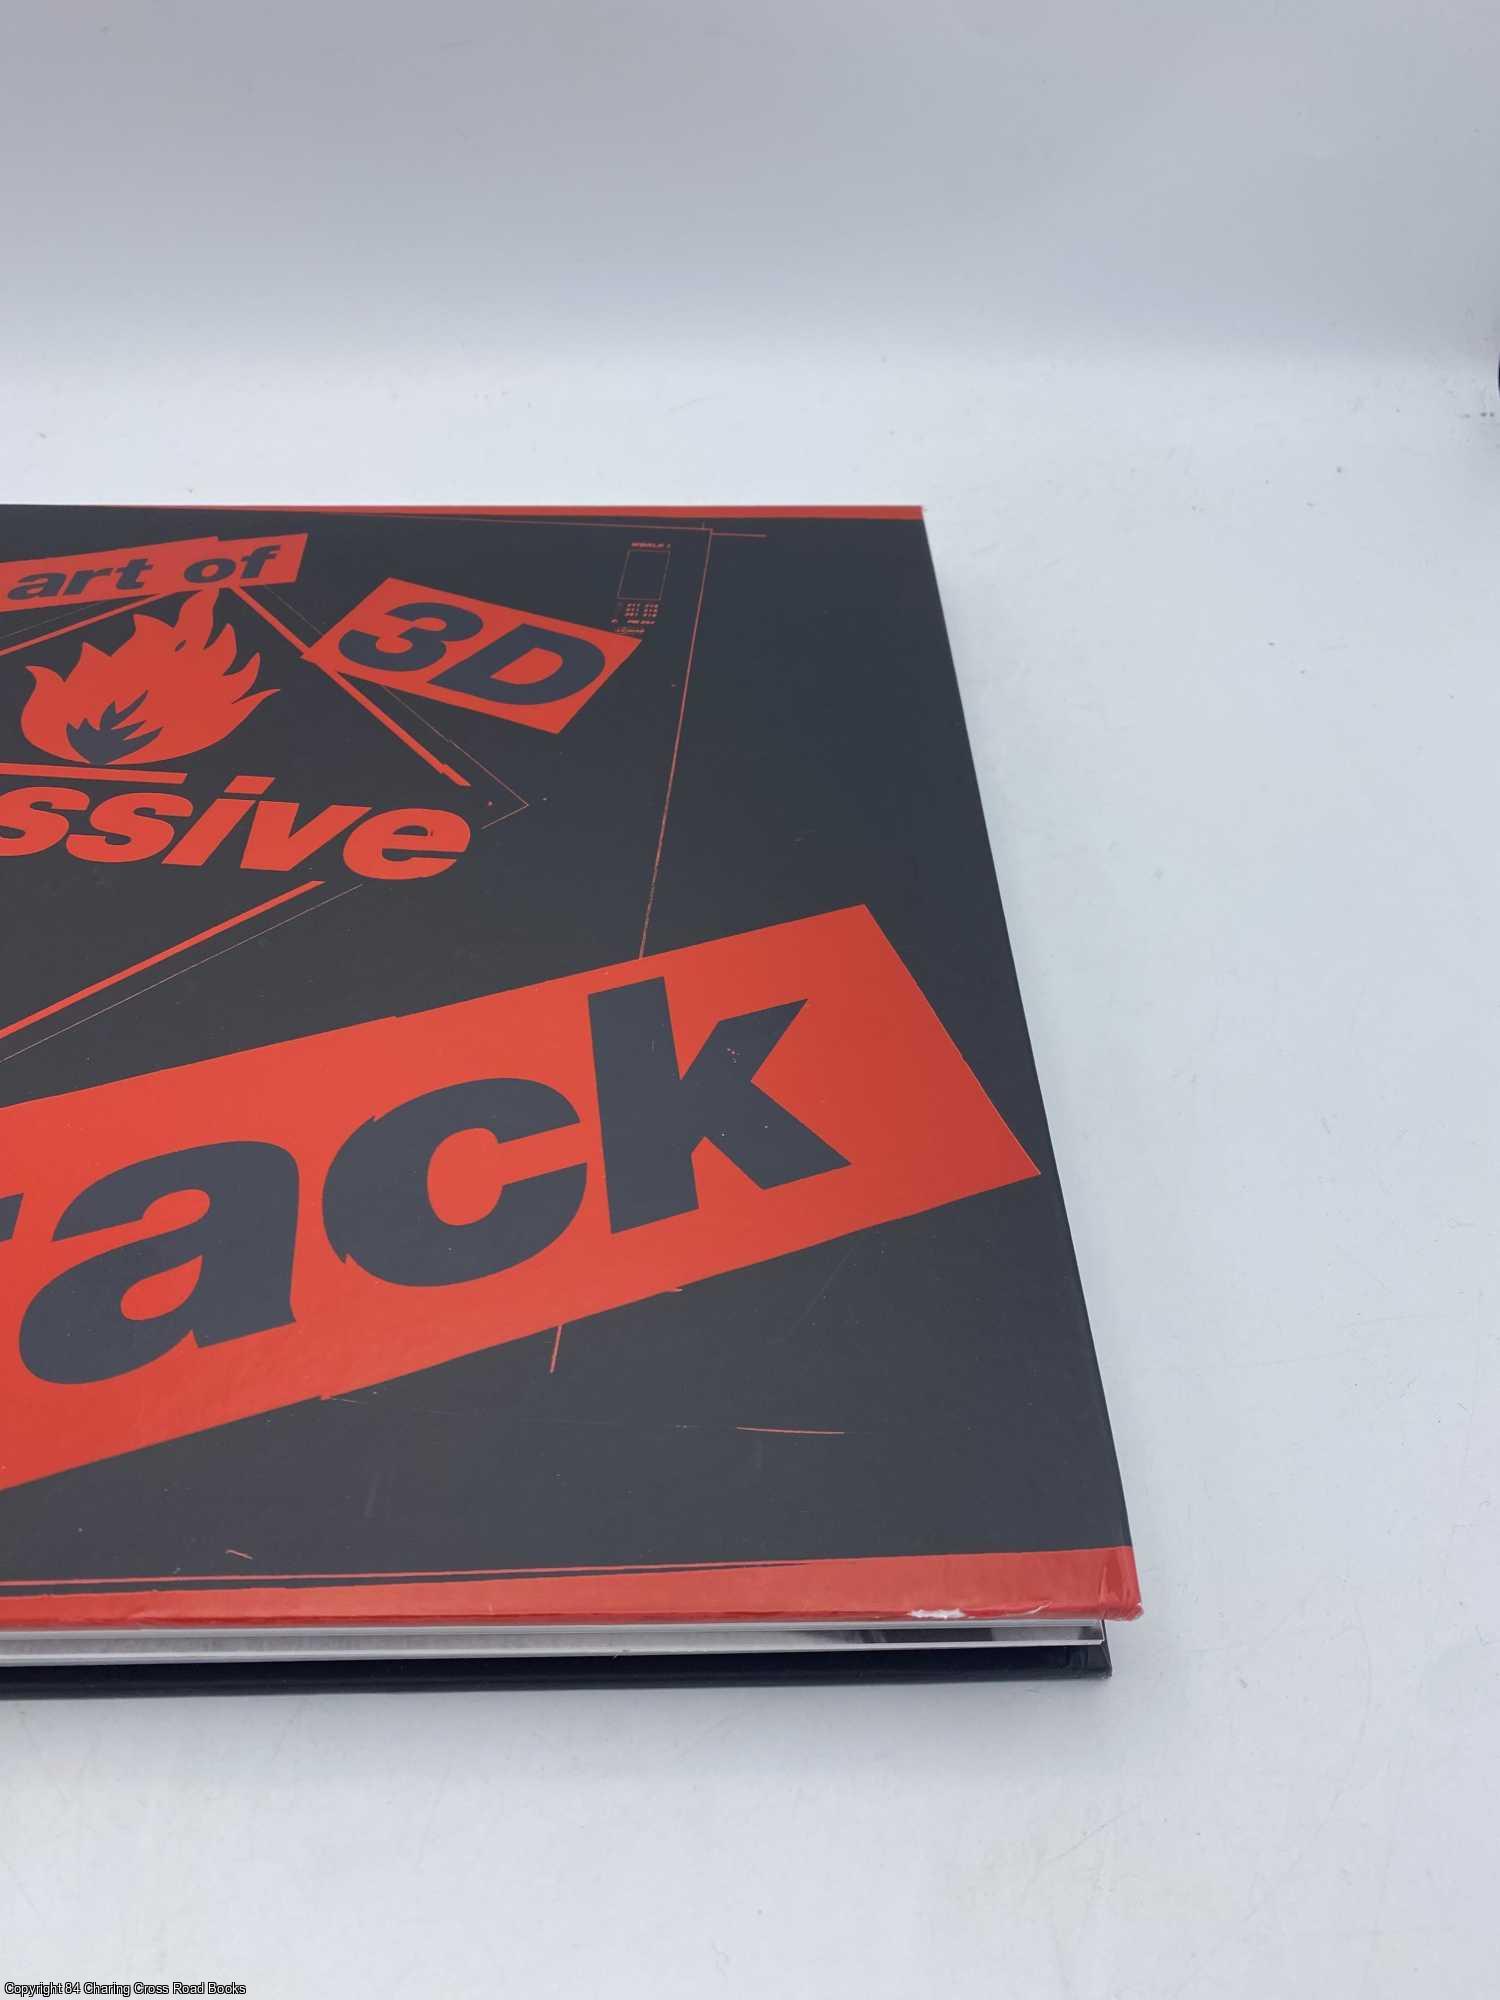 3D and the Art of Massive Attack by Robert Del Naja on 84 Charing Cross  Rare Books